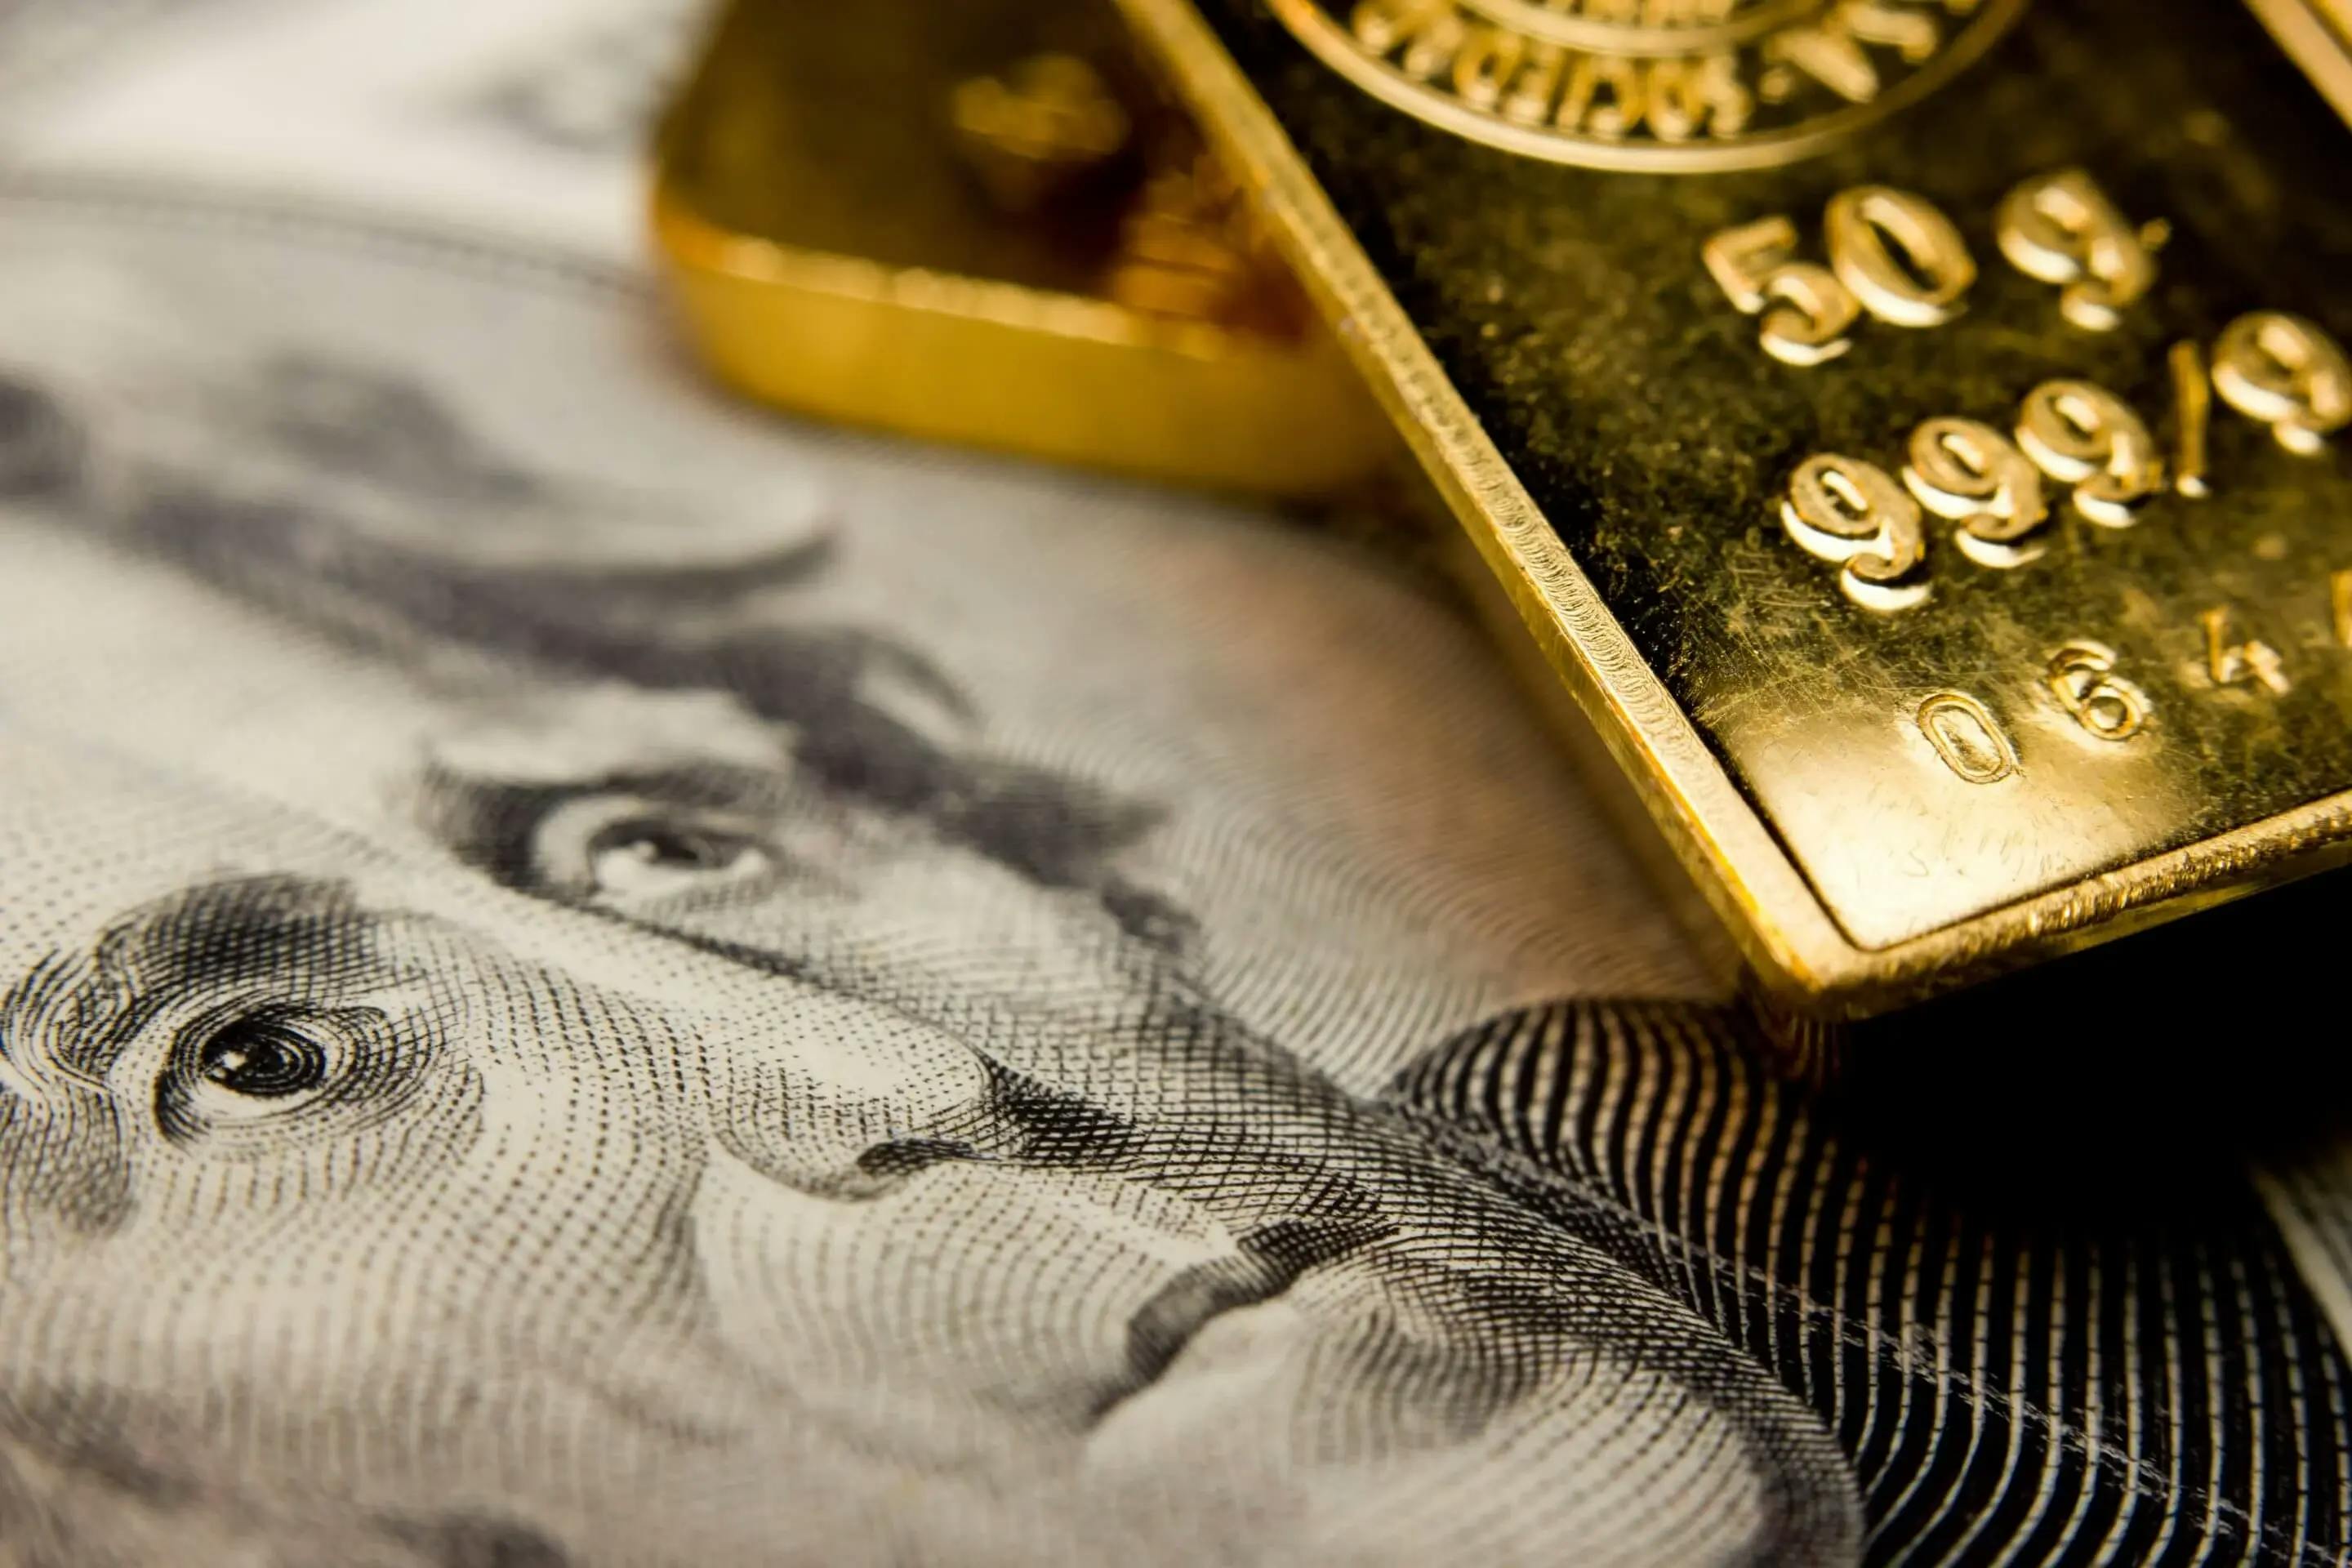 dollar bill and gold bars representing the evolution in monetary systems